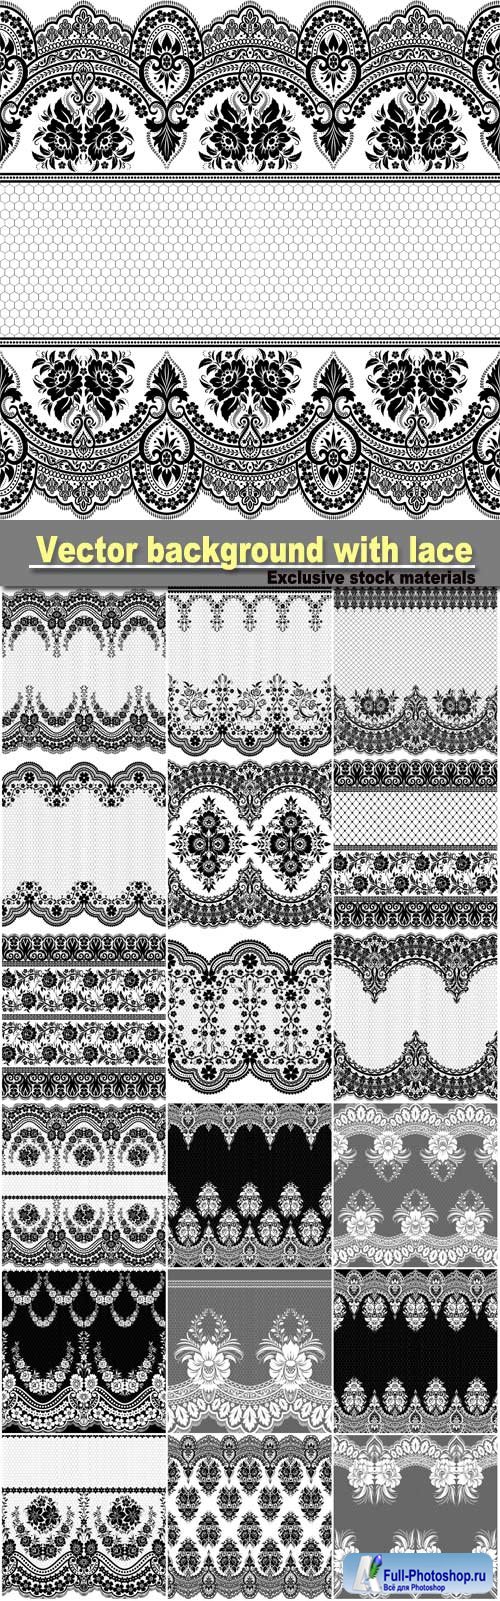 Vector background with floral lace